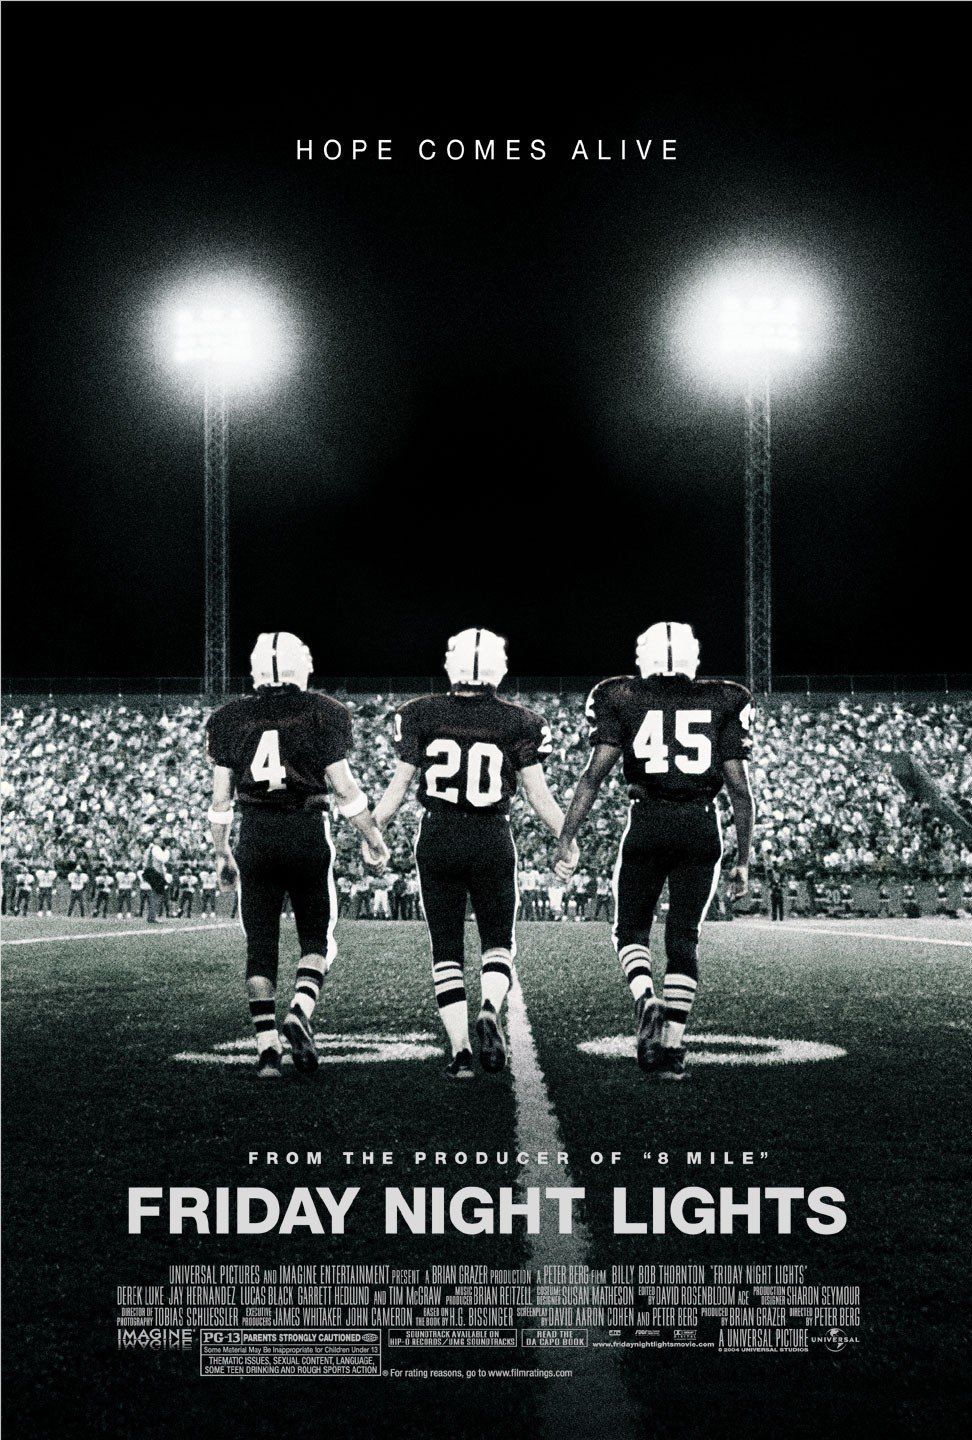 The official poster for the Friday Night Lights movie